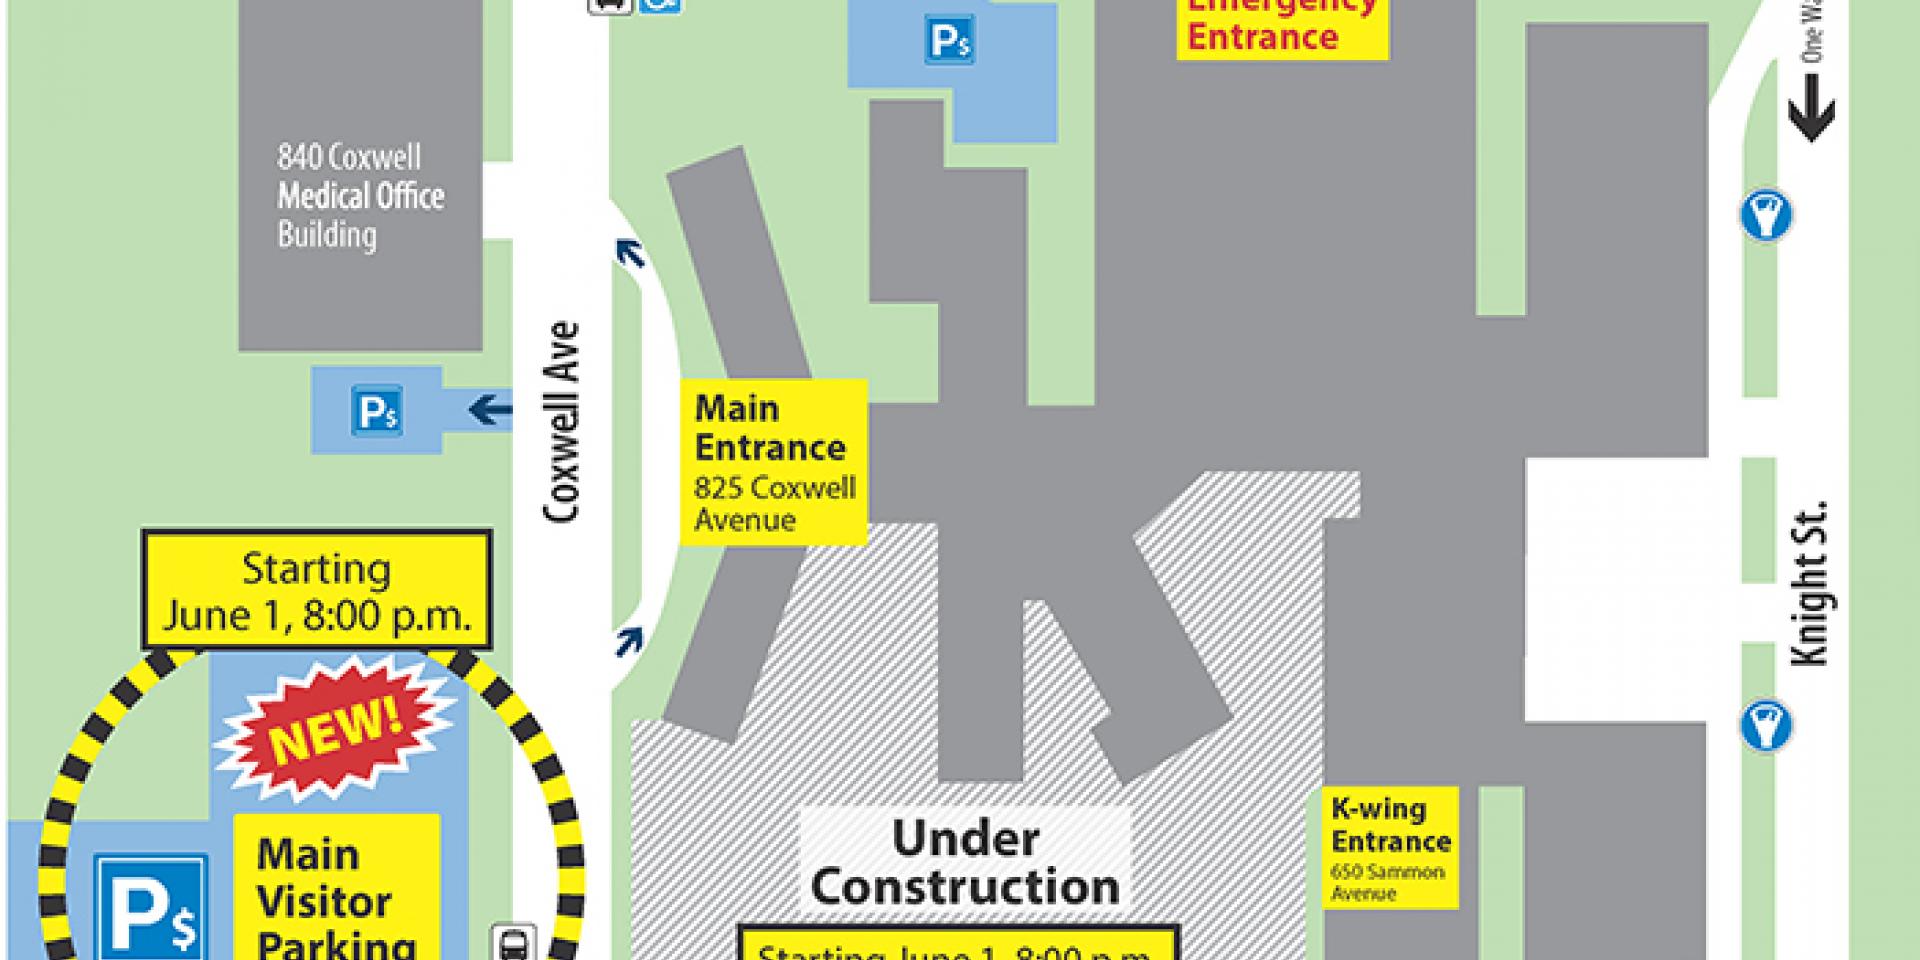 MGH's new public parking lot effective June 1, 2018 at 8 p.m.